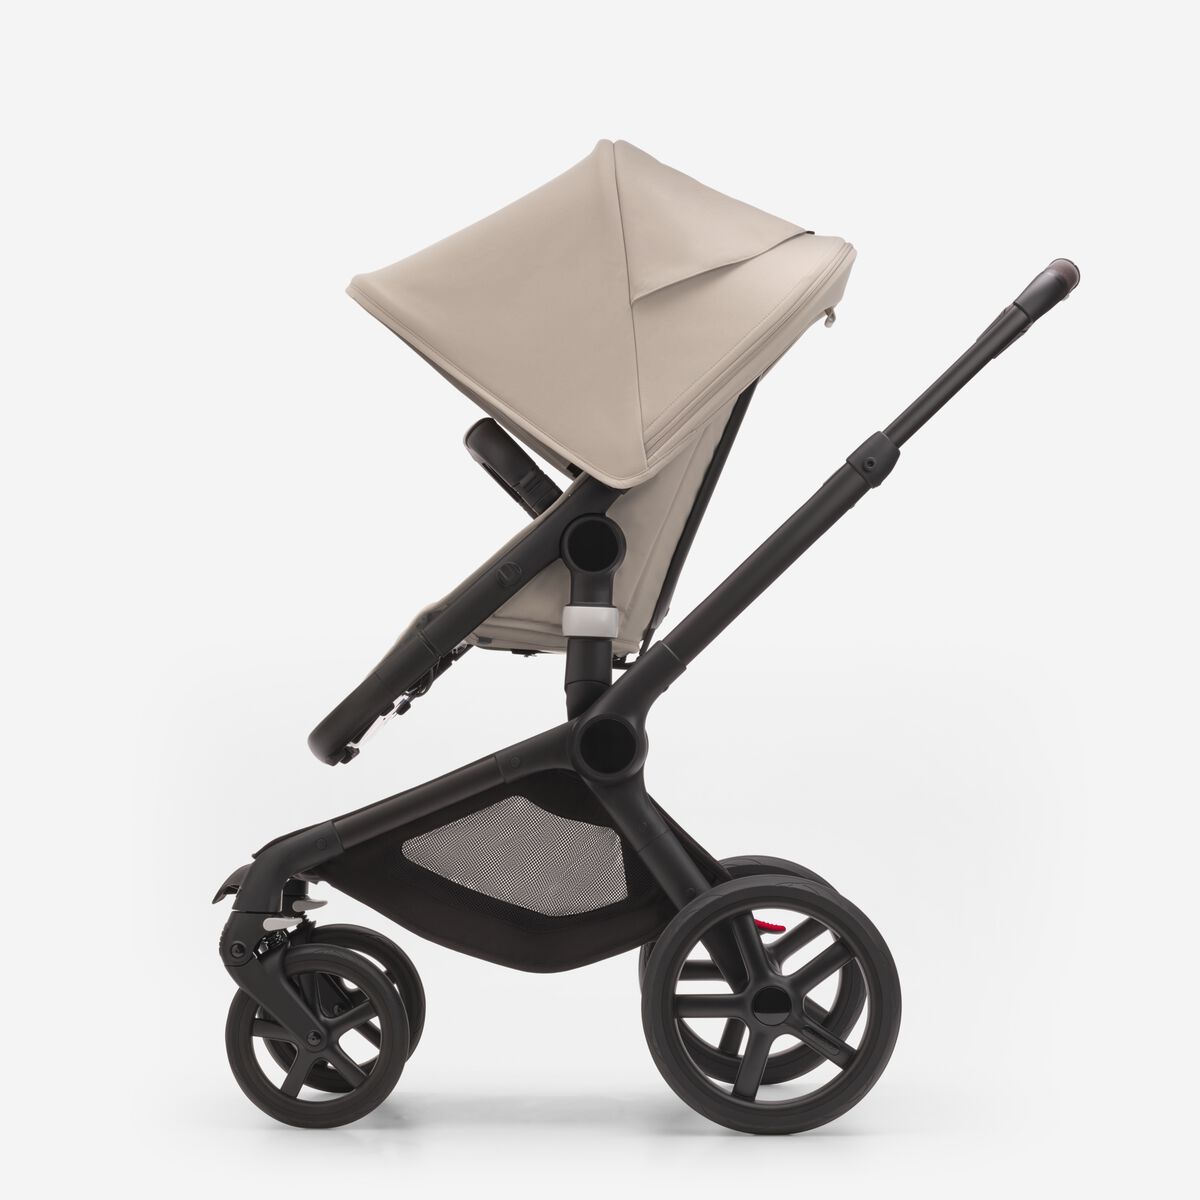 Bugaboo Fox 5 Complete Stroller - ANB Baby -8717450000000$1000 - $2000